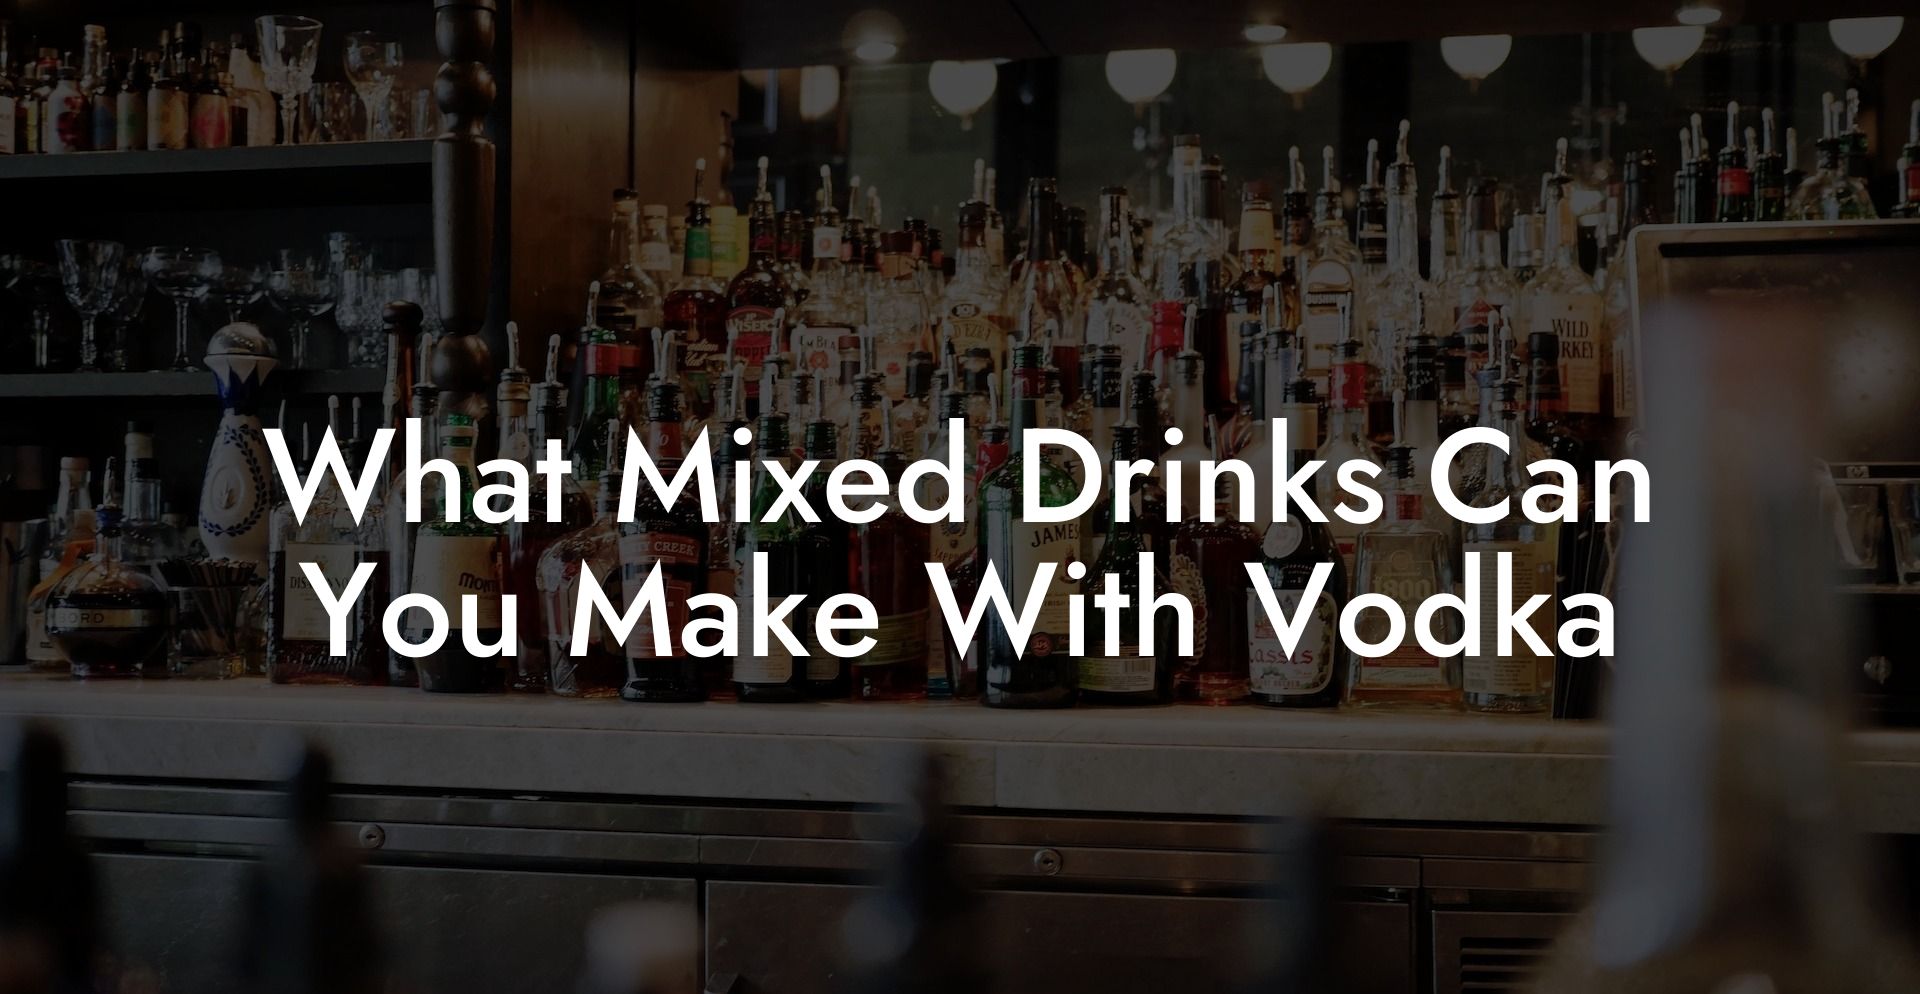 What Mixed Drinks Can You Make With Vodka